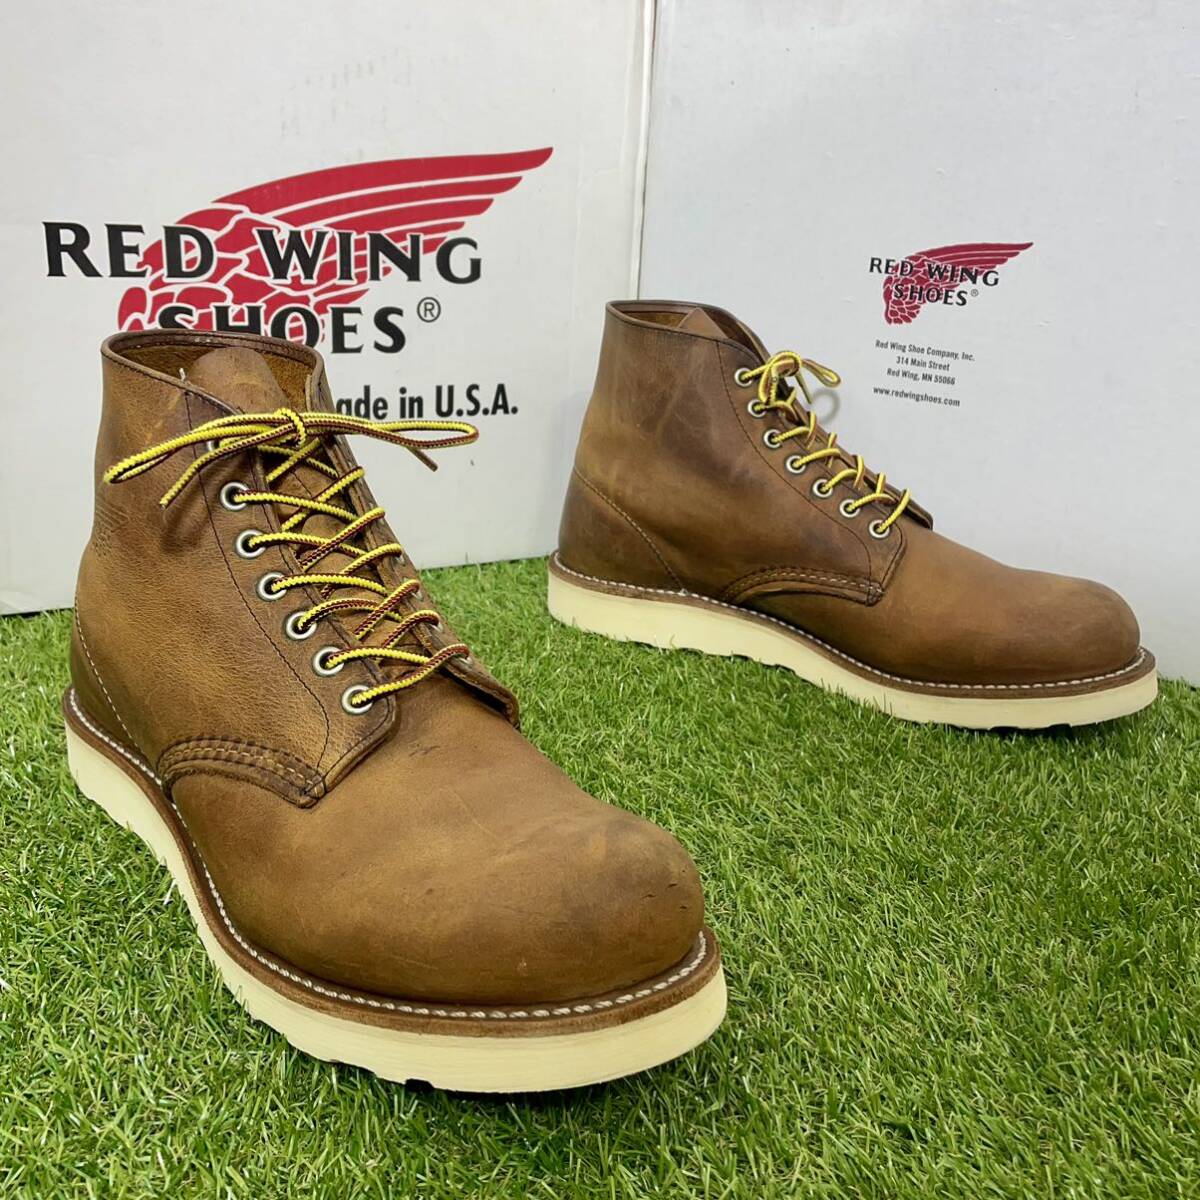 [ safety quality 0264] records out of production 9111 Red Wing REDWING10D including carriage 28